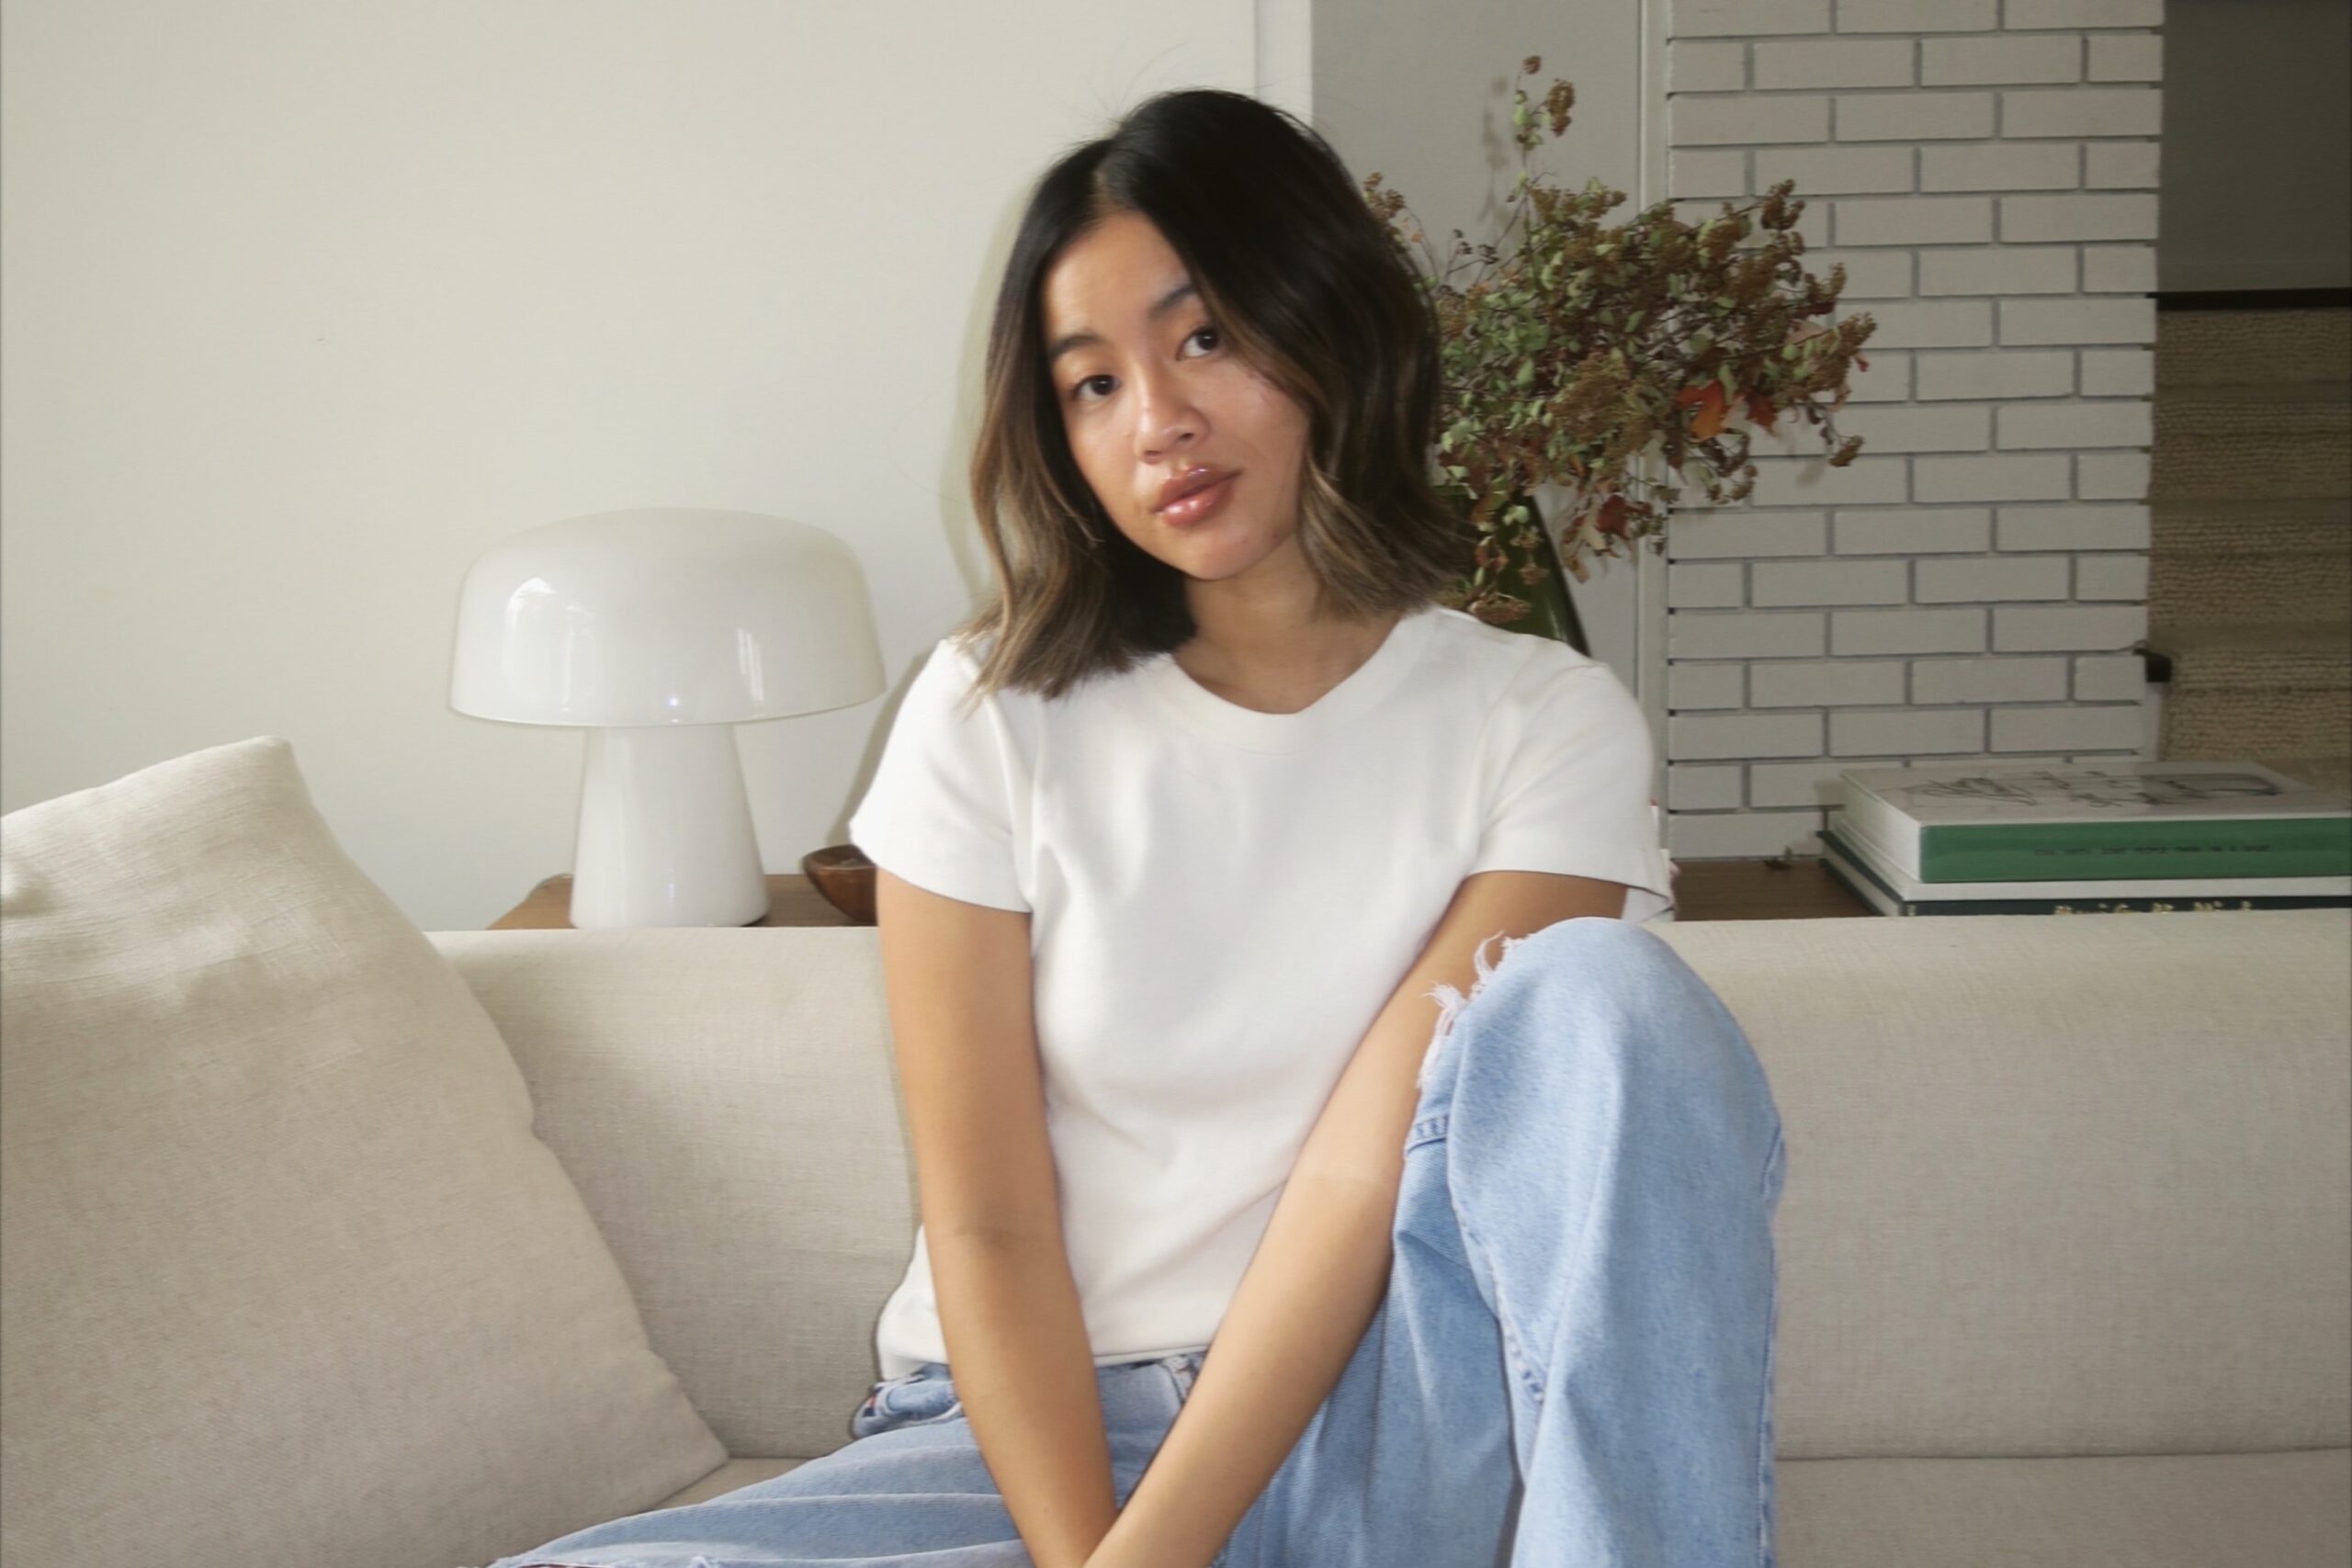 Rachel Spencer Wong sitting on couch with white tshirt and blue jeans